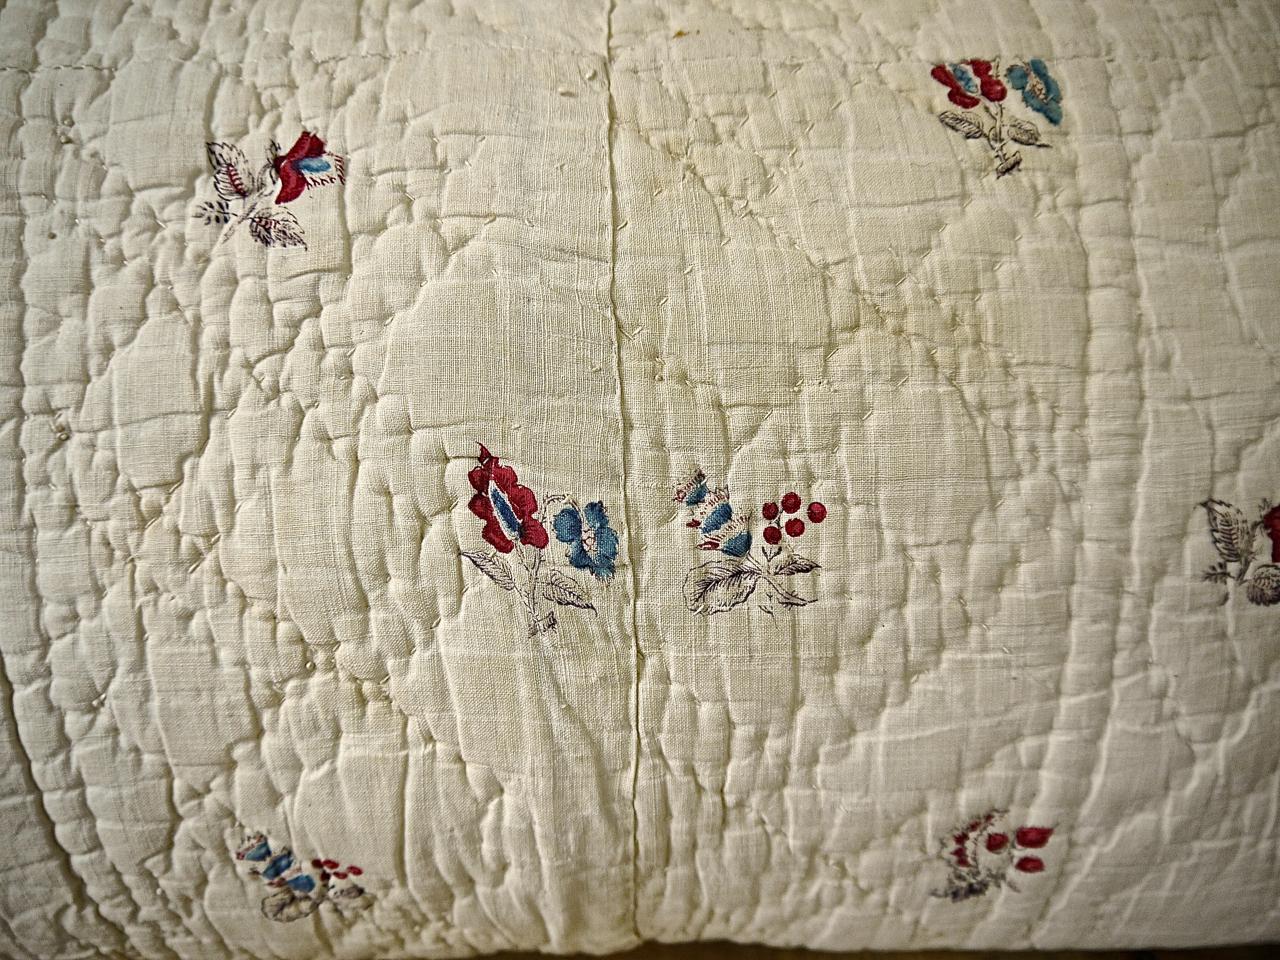 18th century French soft cotton cushion block printed with delicately drawn flower motifs. Soft raspberry pink and pale blue flowers with pale mauve leaves and stems make a fresh and charming textile. Simply quilted in a pattern of circles. In an